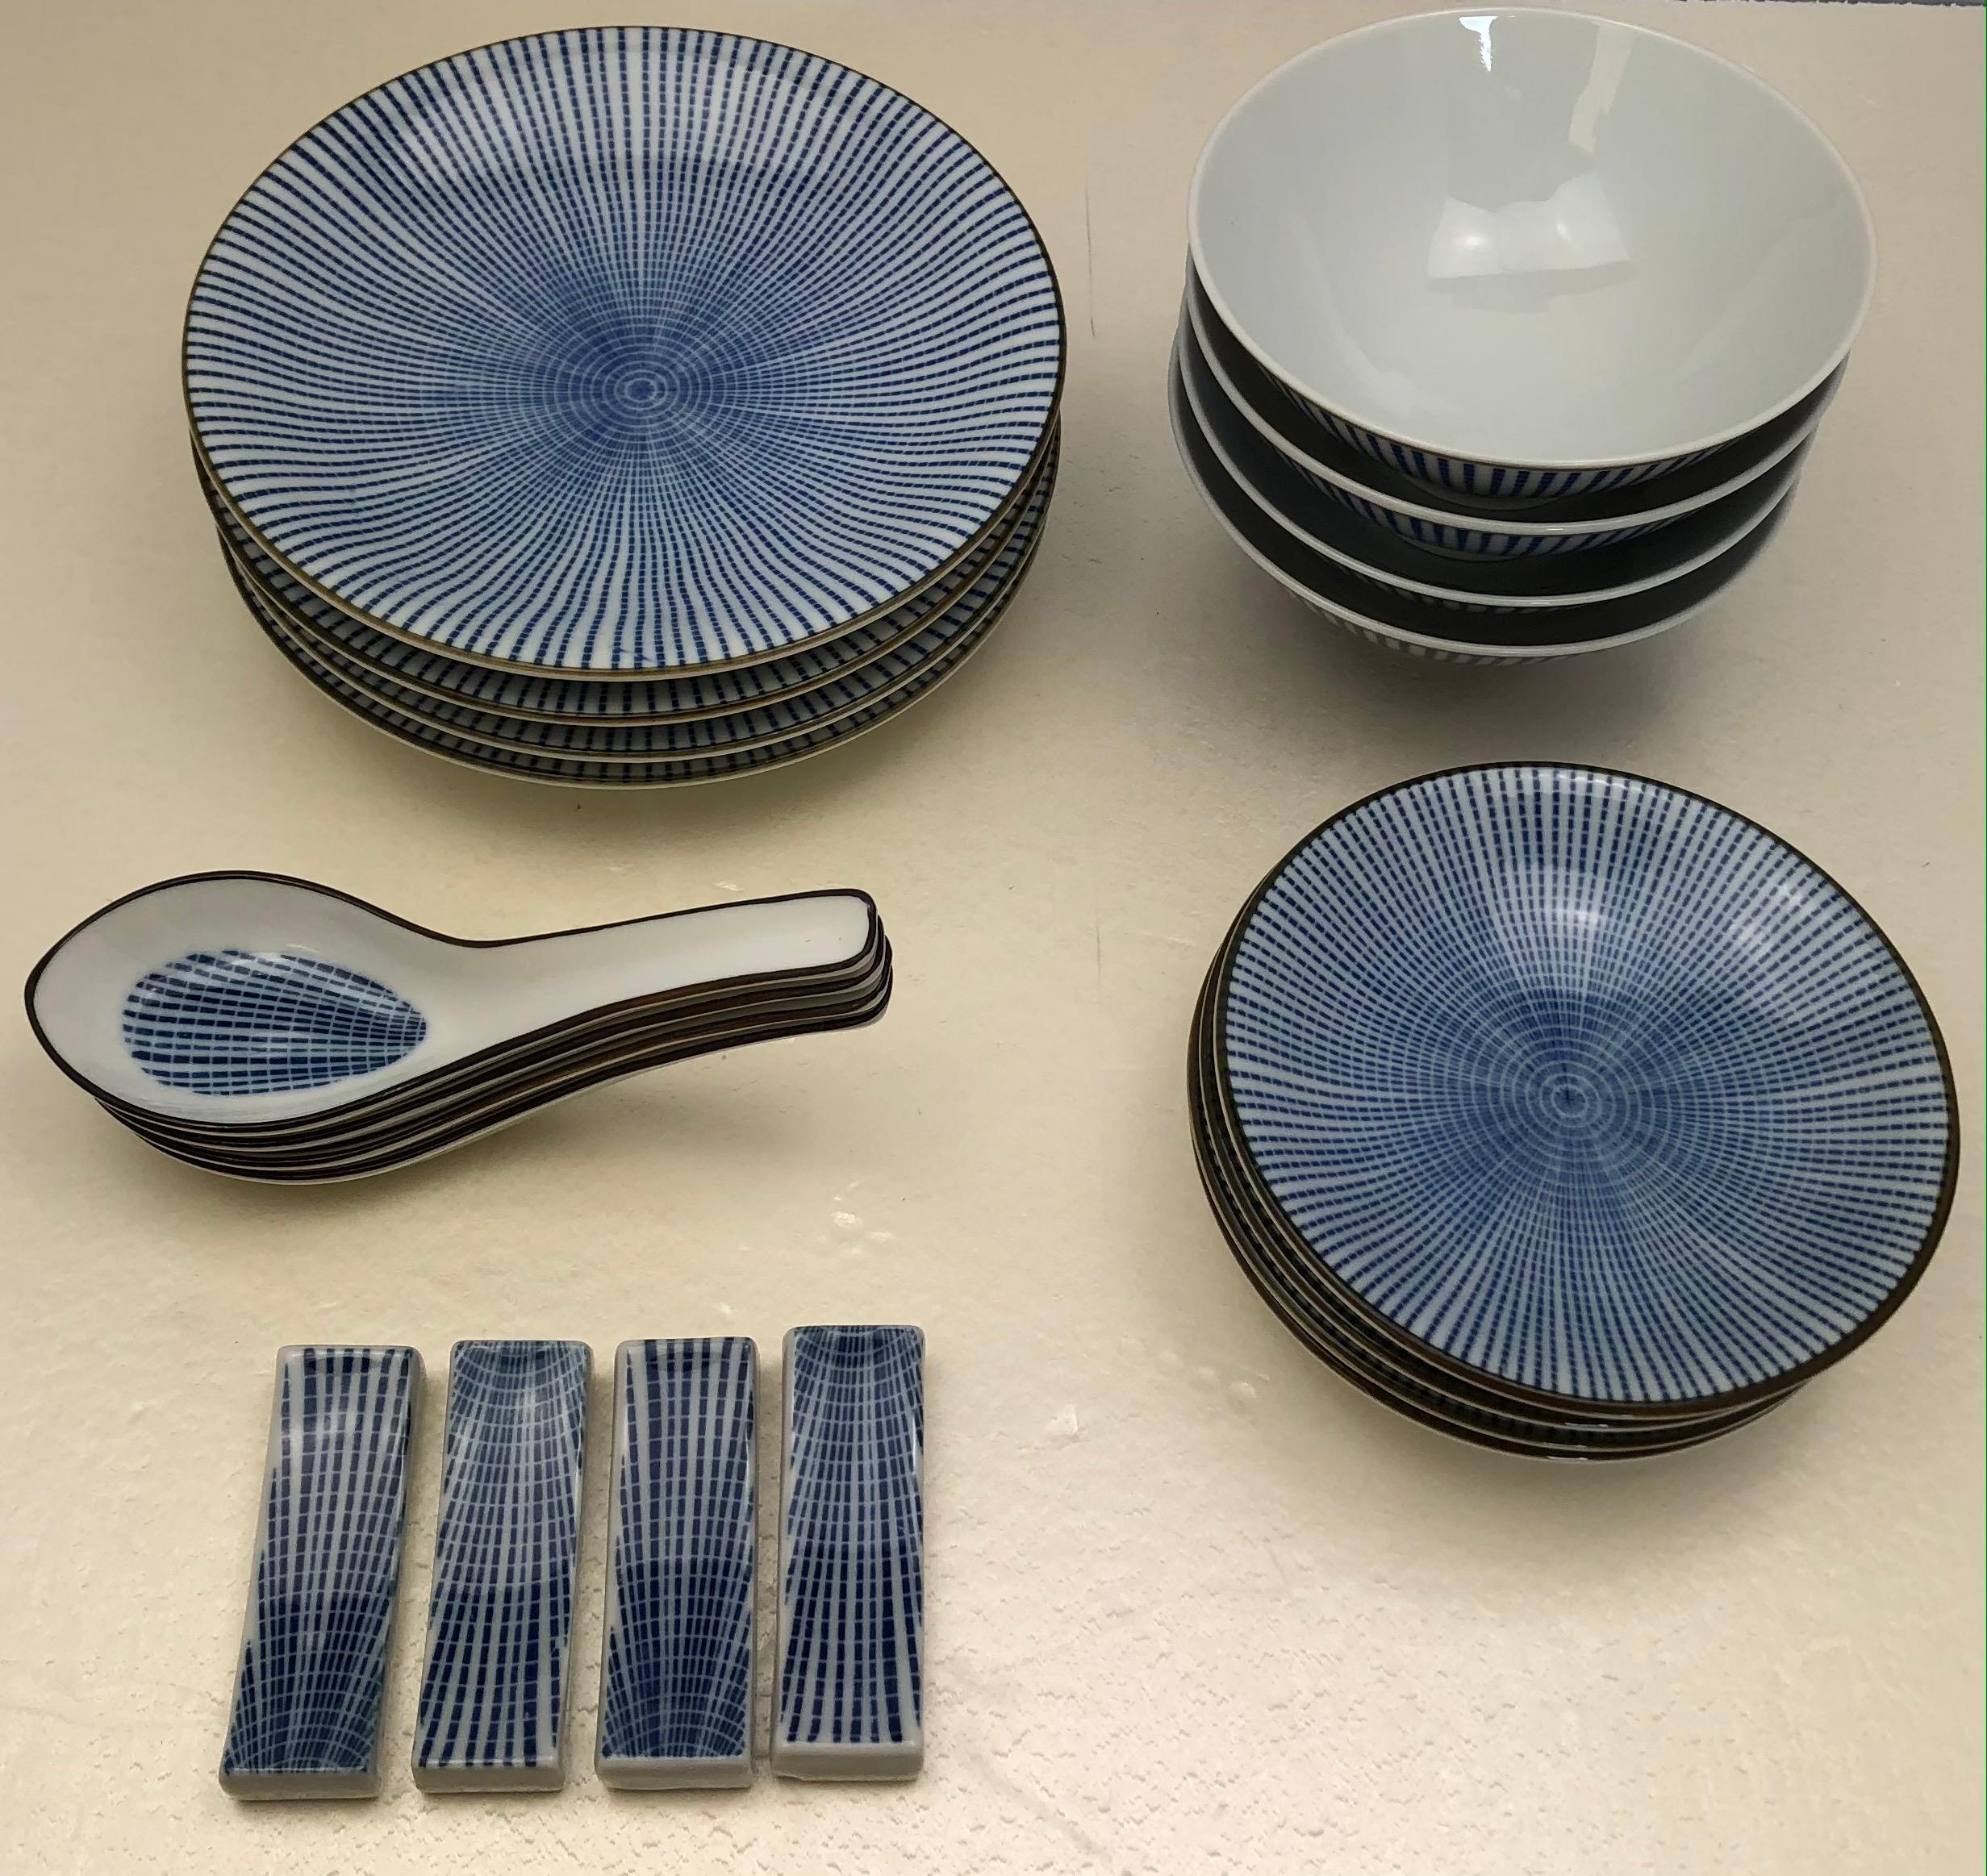 Very nice quality Japanese sushi and miso soup/rice dish set.  A beautiful serving set made of hand glazed porcelain. 

Perfect condition and ready to use.

Measurements: 
Spoons 5 1/2